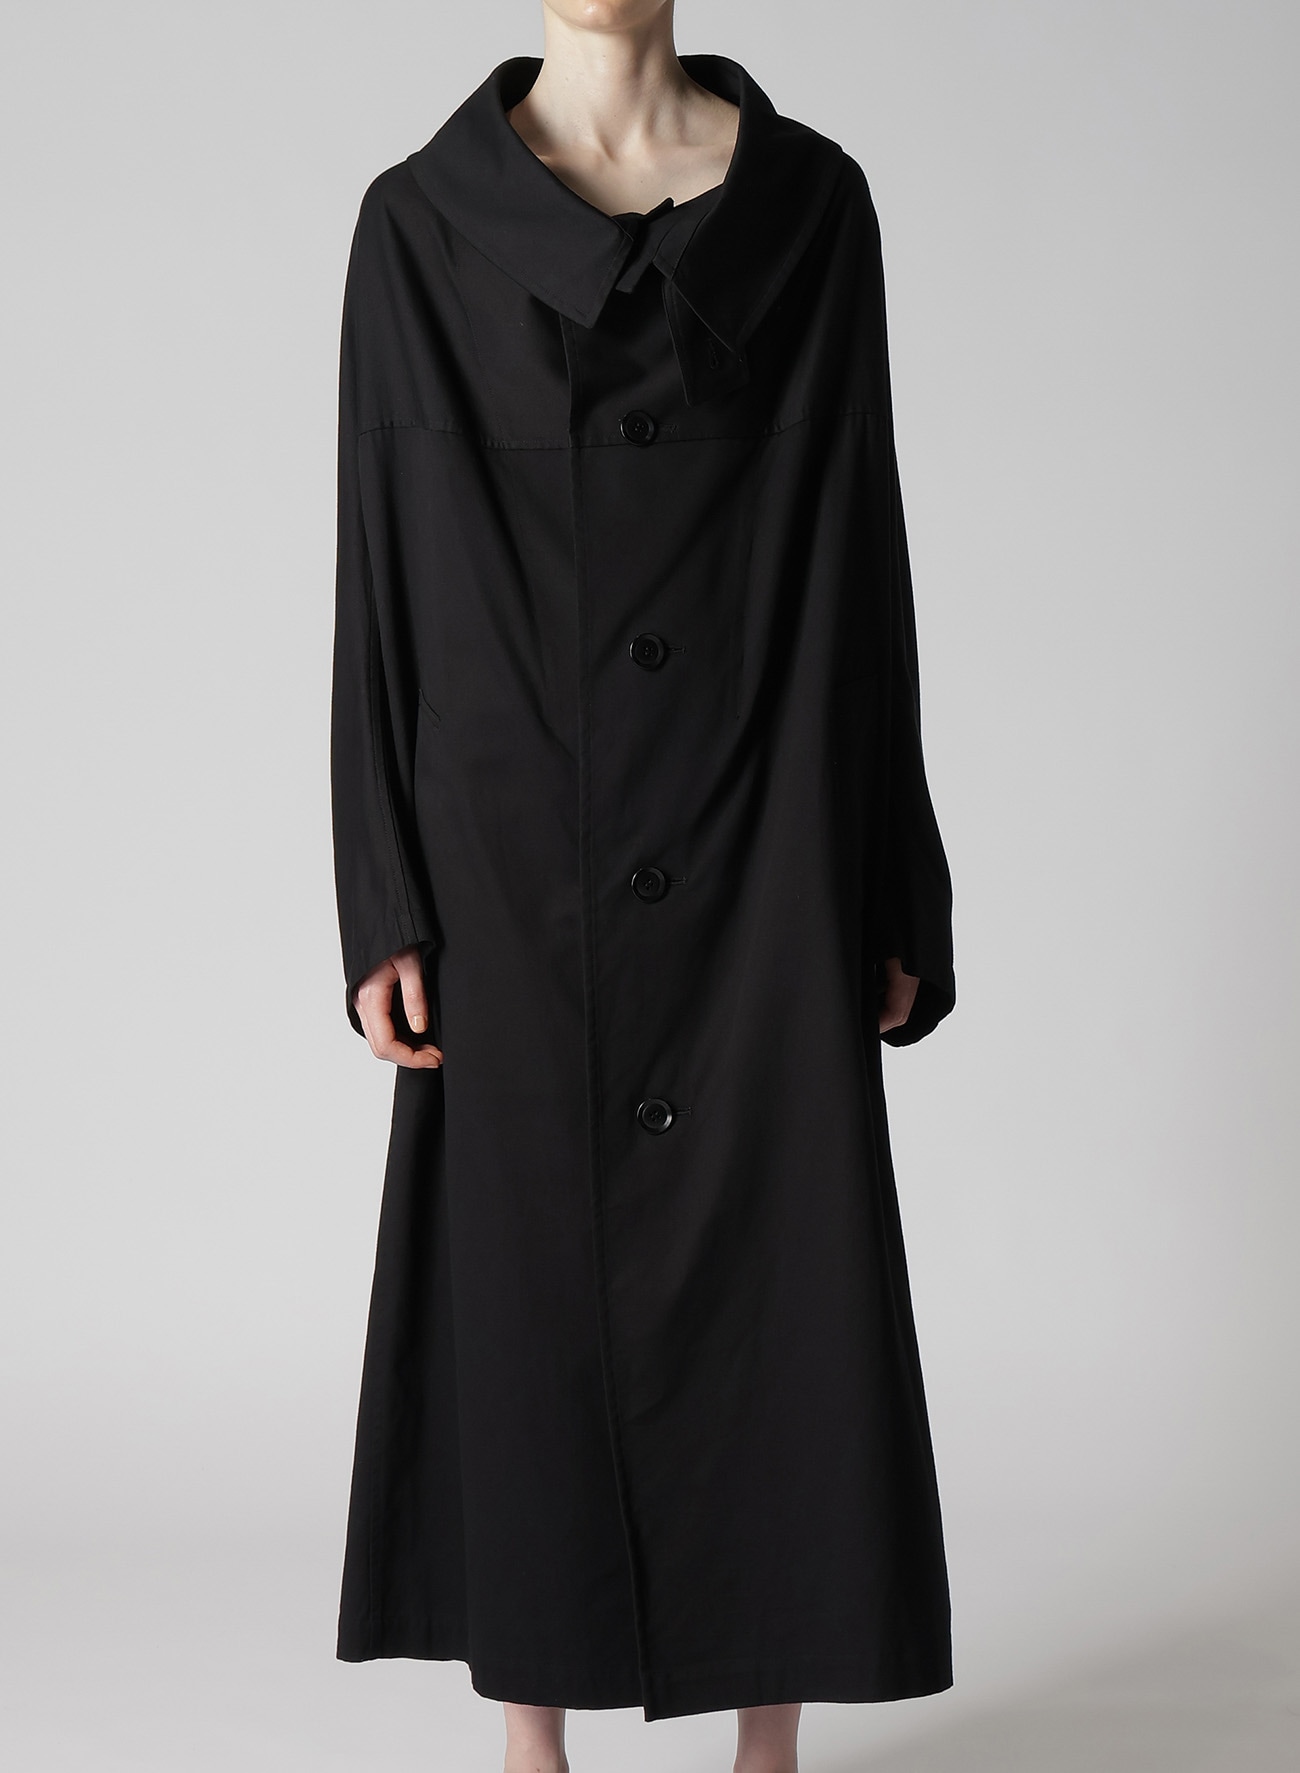 Y's BORN PRODUCT] COTTON TWILL LONG CAPE COAT(XS Black): Y's｜THE 